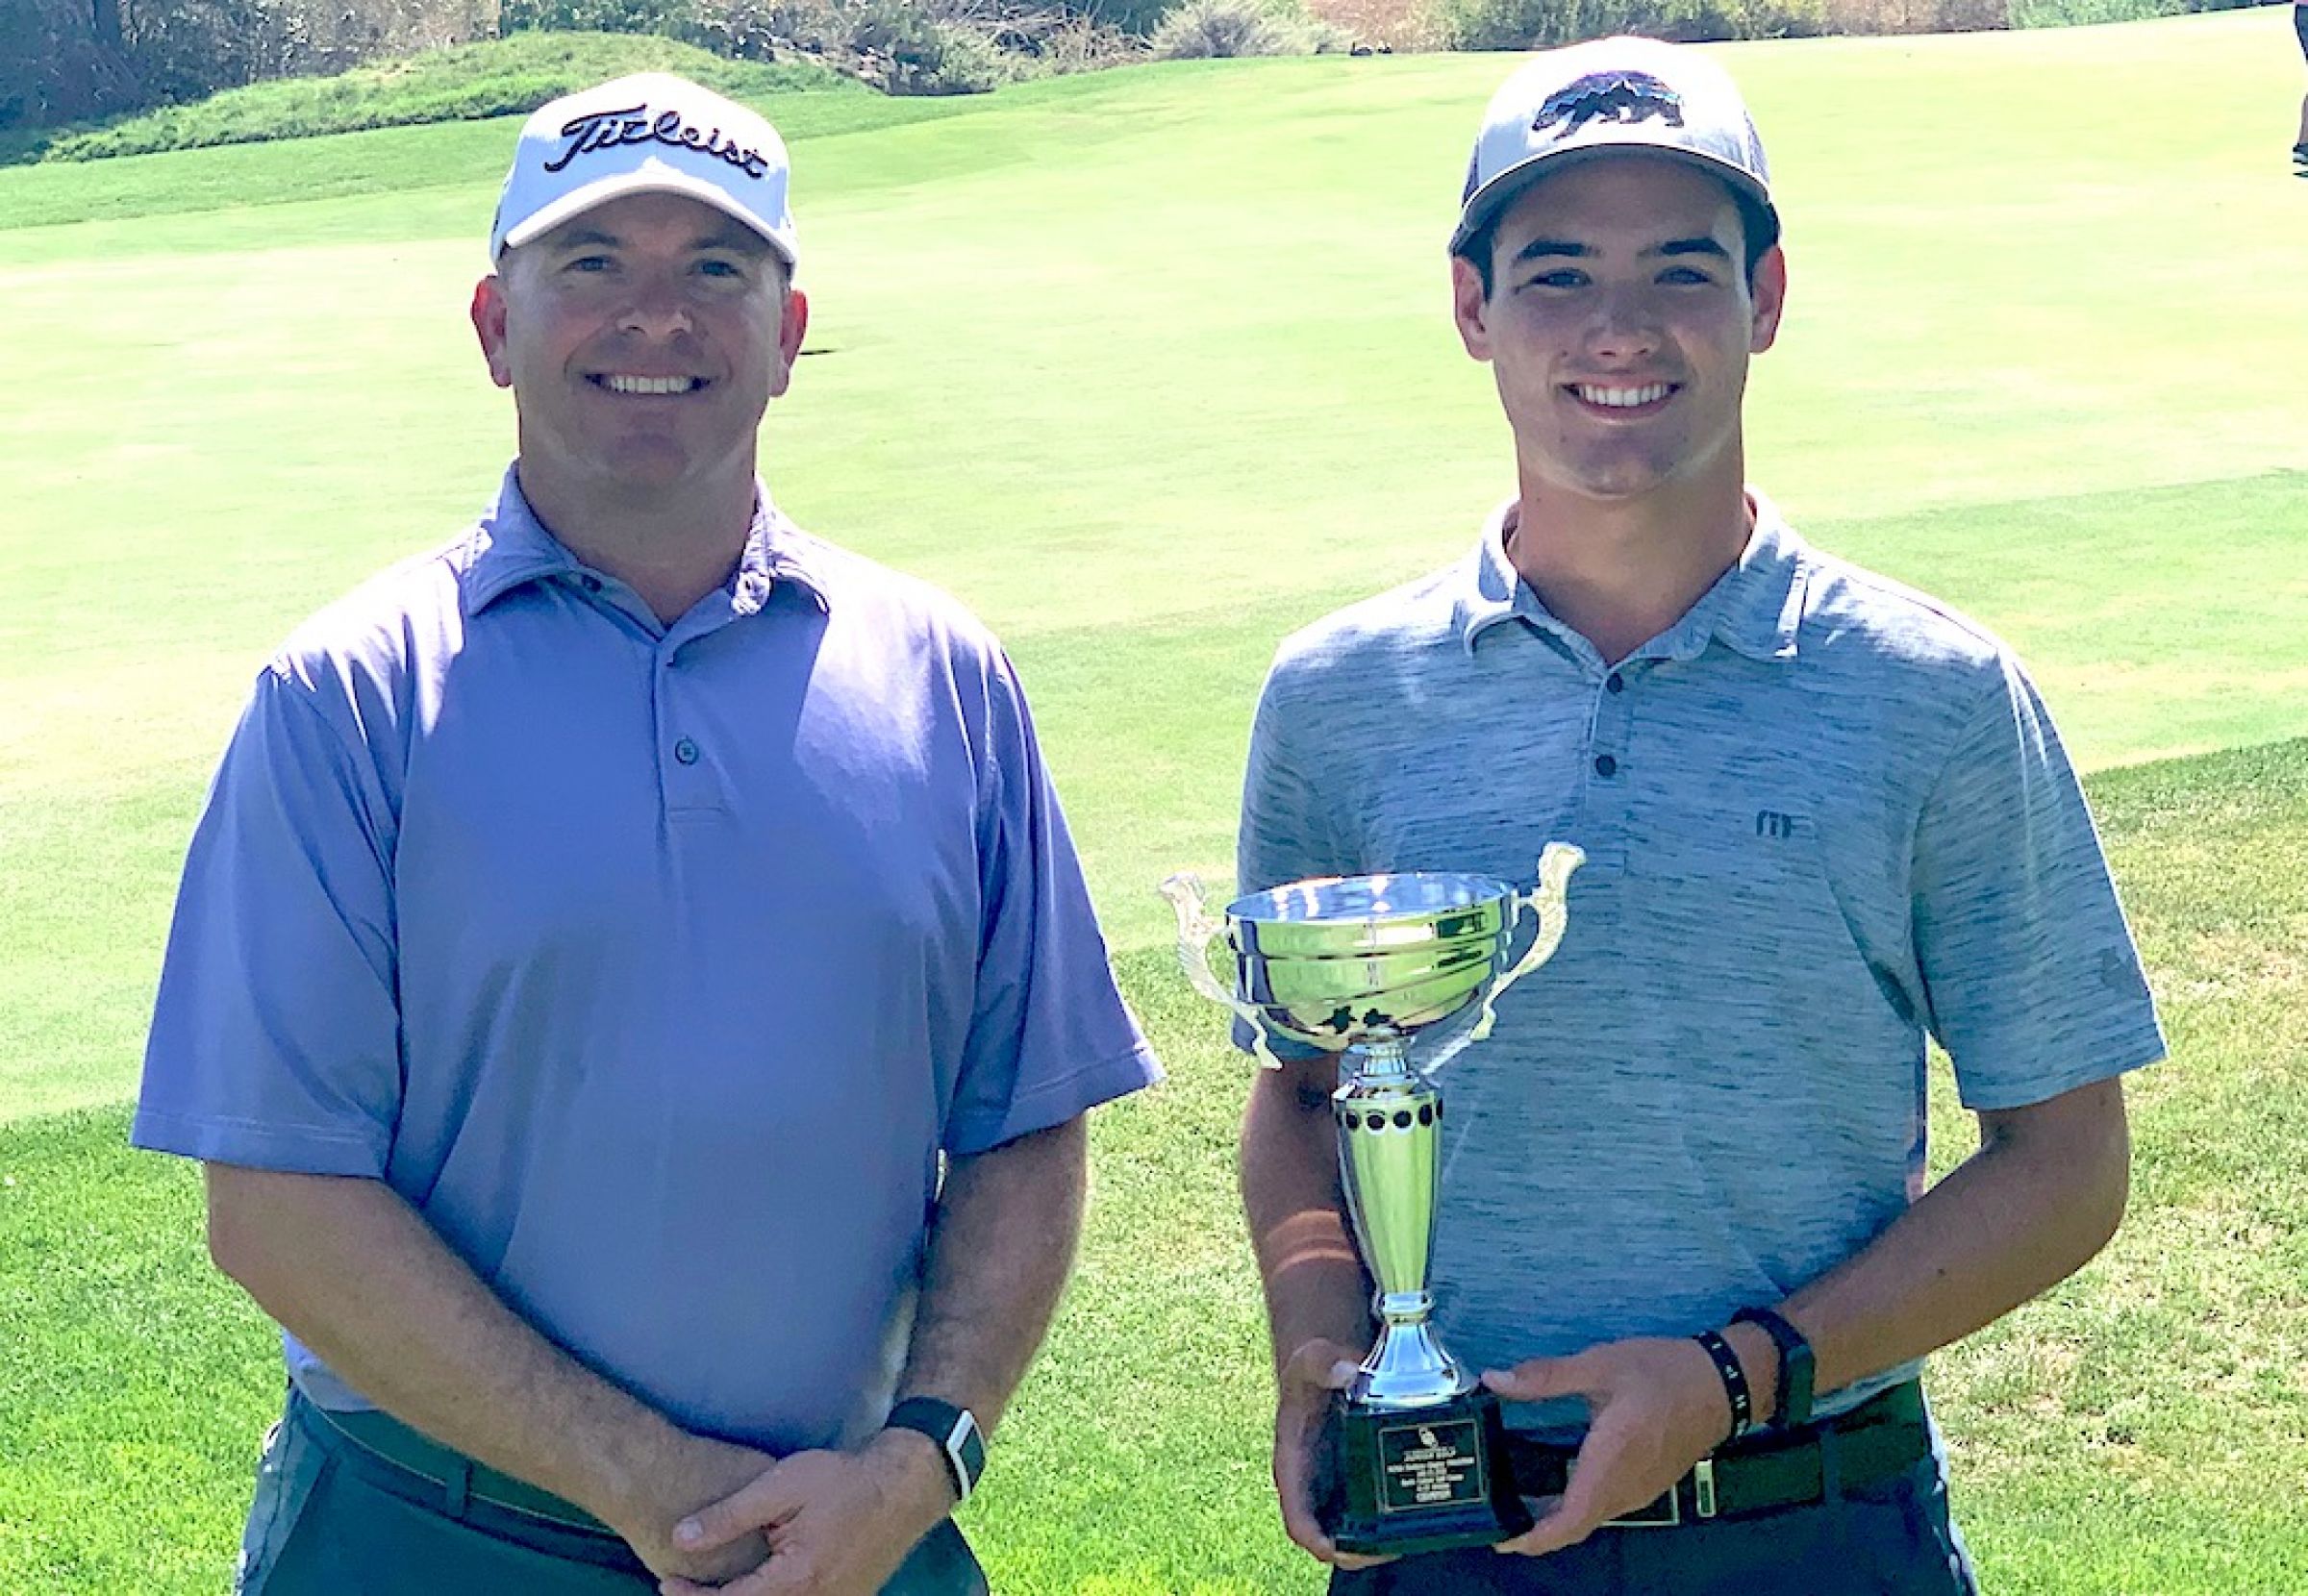 SYHS golfer continues competing with his dad in SoCal tournaments